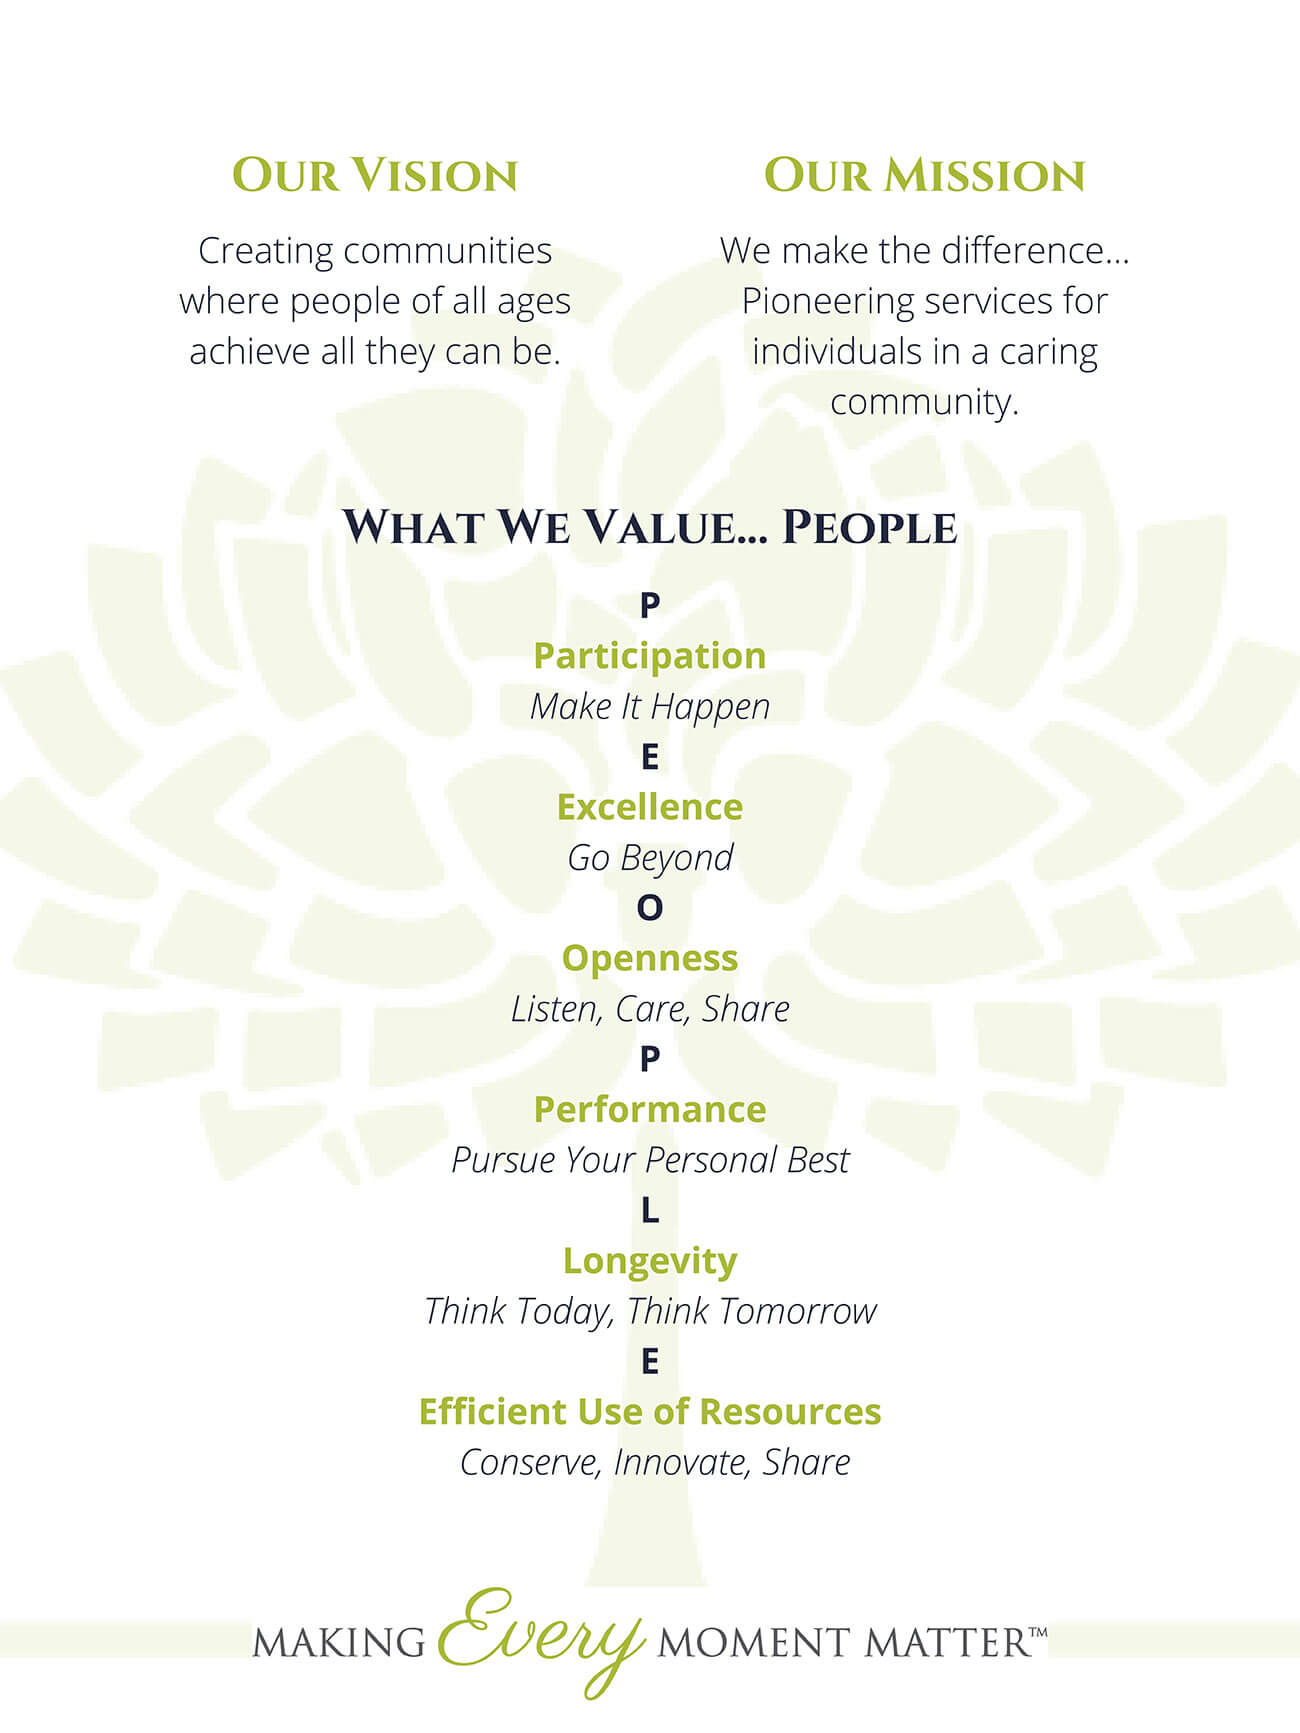 Our Vision: Creating communities where people of all ages achieve all they can be. Our Mission: We make the difference... Pioneering services for indyviduals in caring community. What we value...People | P - Participation - Make it happen; E - Excellence - Go beyond; O - Opennes - Listen, Care, Share; P- Performance - Pursue your personal best; L - Longevity - Think today, think tomorrow; E - Efficient use of resources - Conserve, innovate, share. Making Every Moment Matter